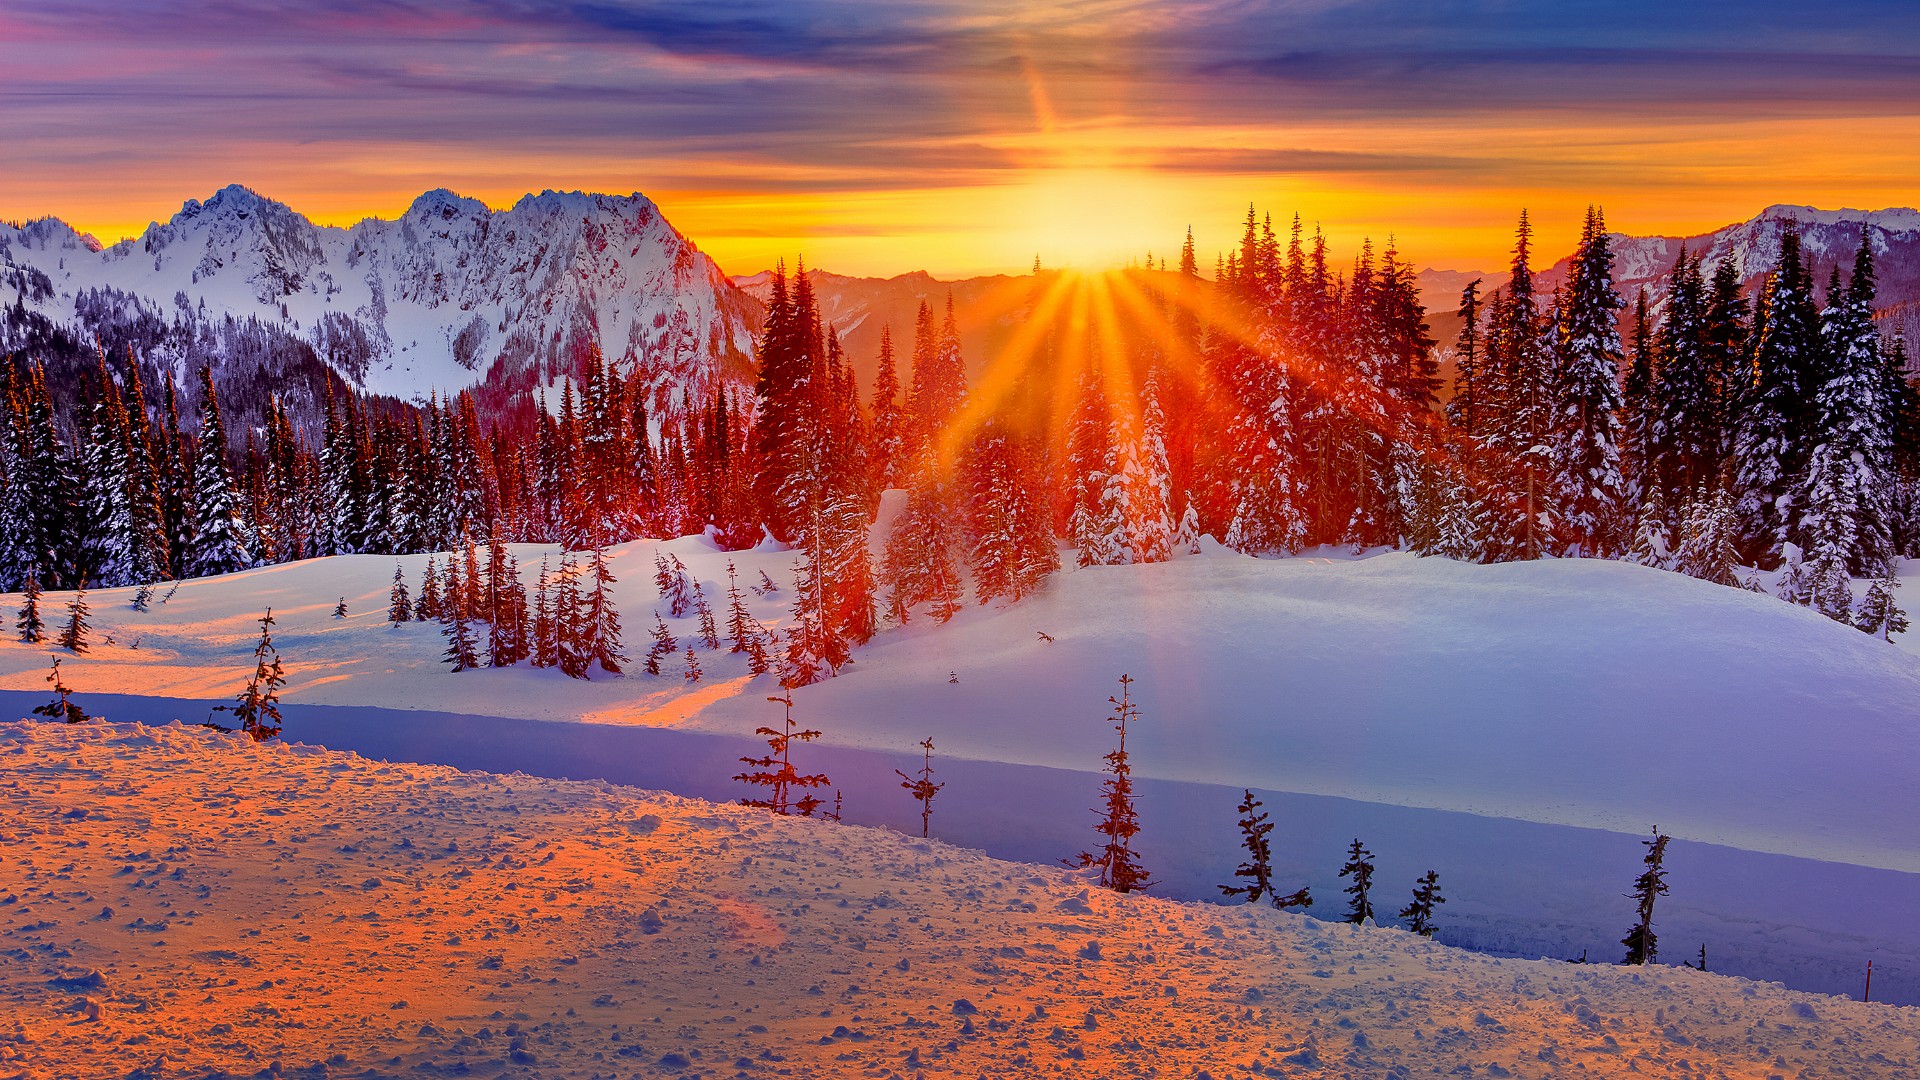 Winter Sunset Over The Mountains Wallpaper - Backiee